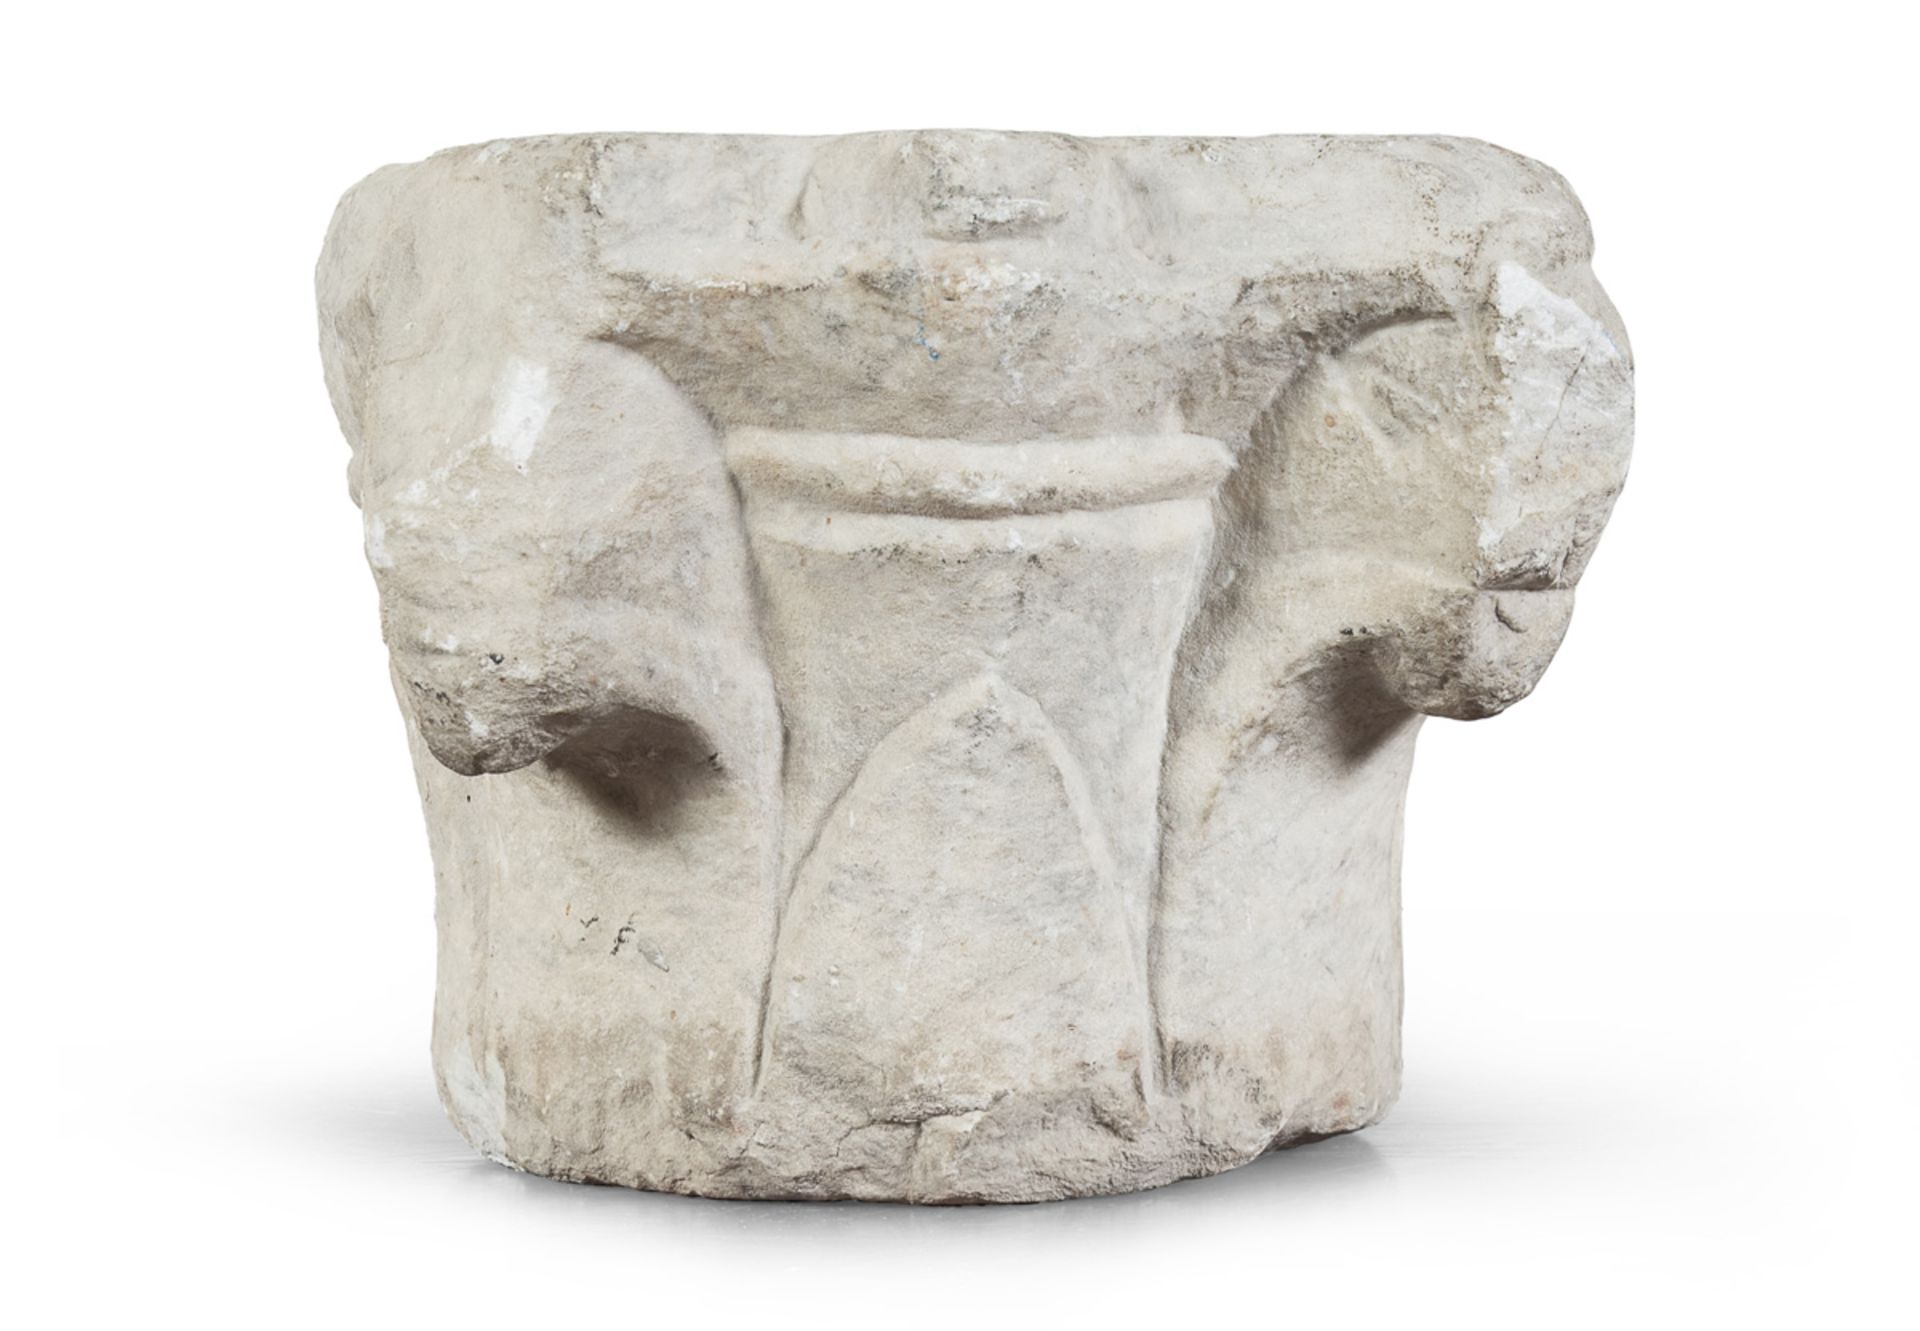 CAPITAL IN WHITE MARBLE - MEDIEVAL PERIOD